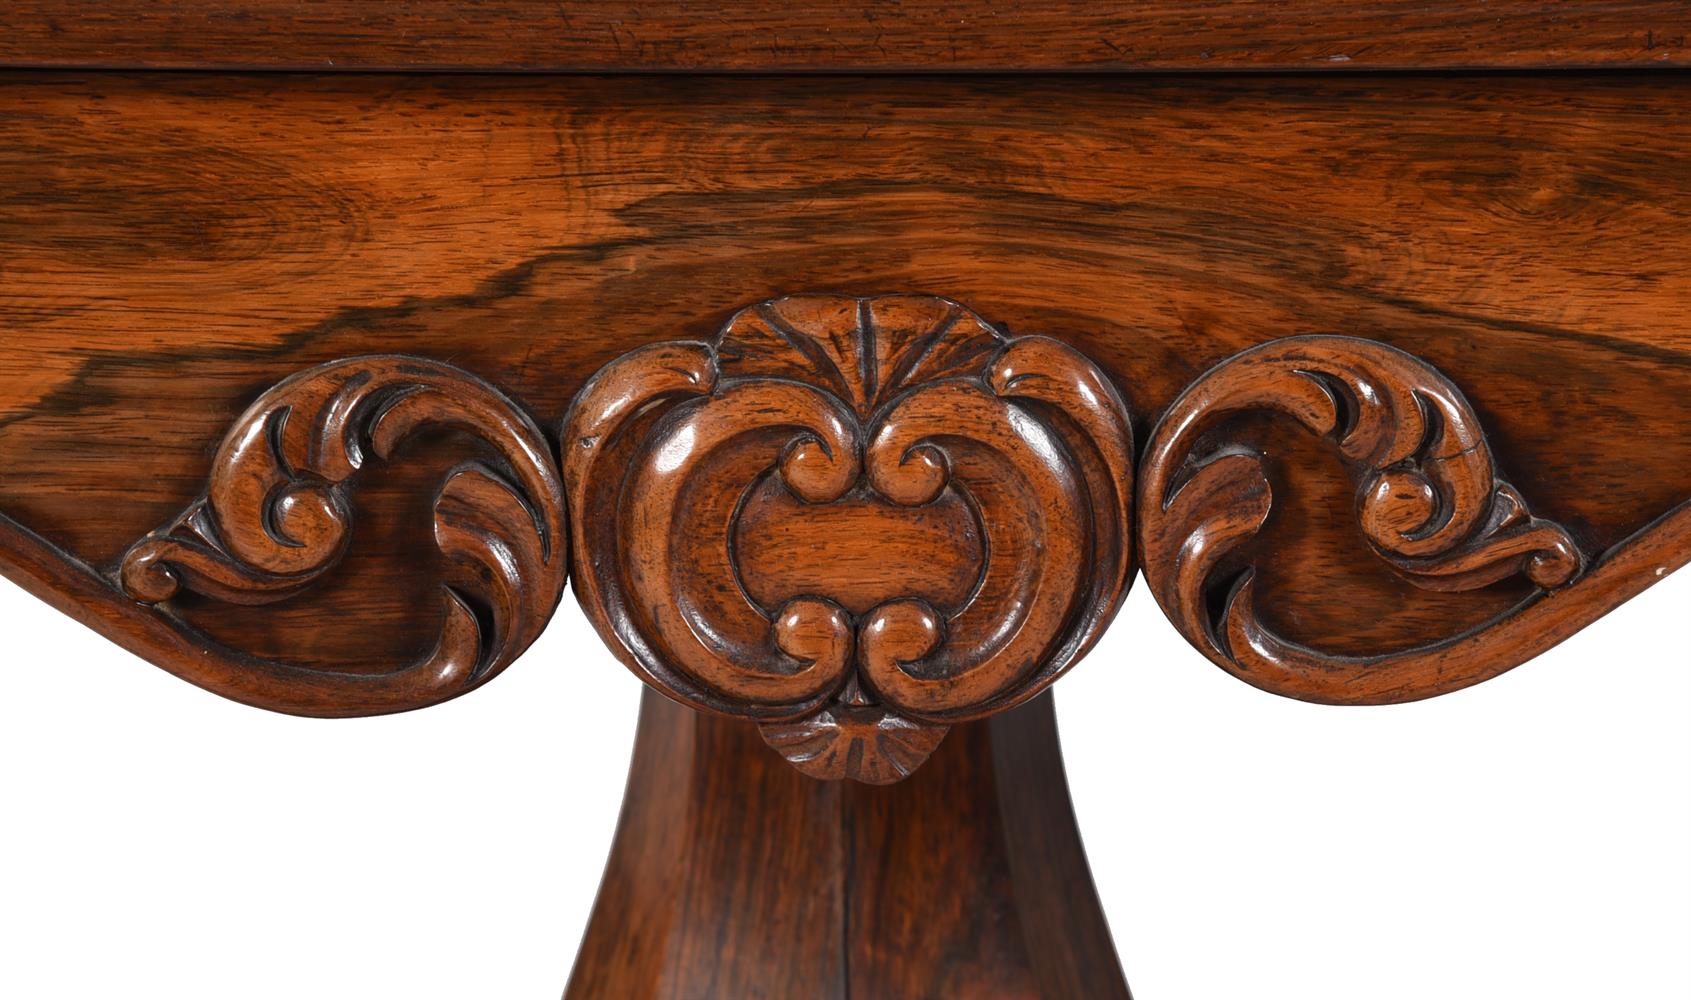 Y A WILLIAM IV ROSEWOOD LIBRARY TABLE - Image 3 of 6